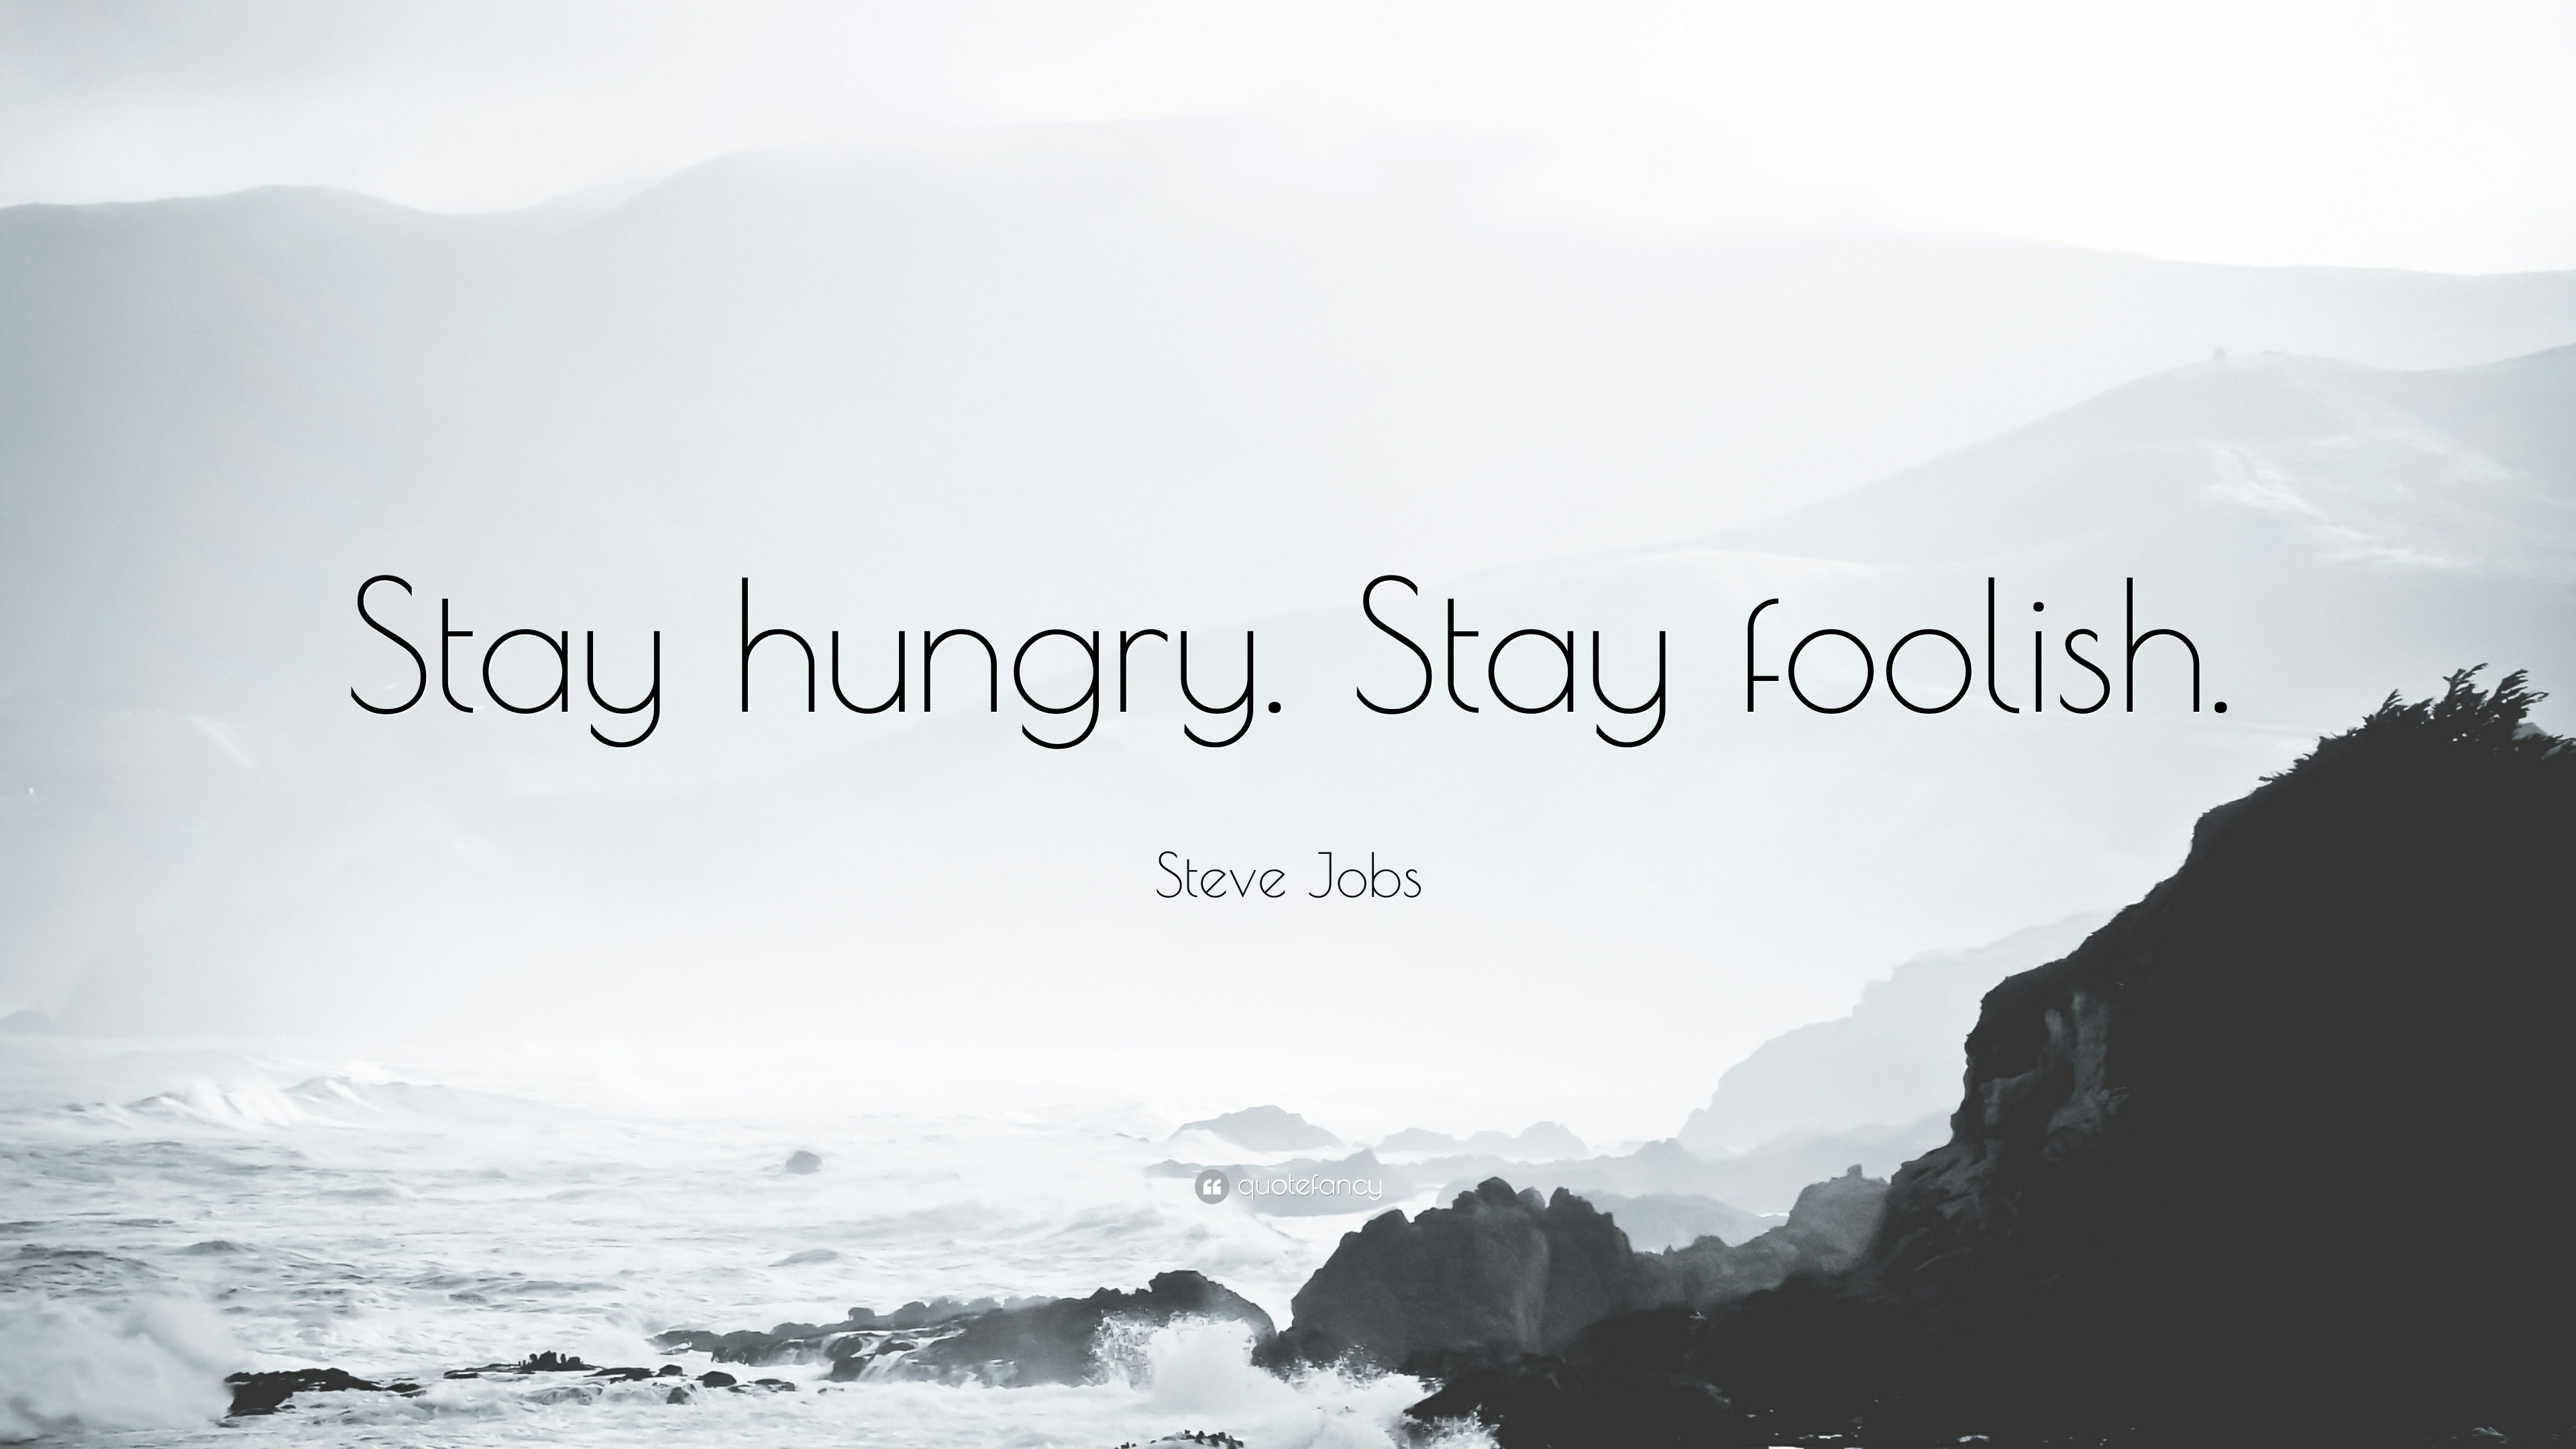 Steve Jobs Quote: "Stay hungry. Stay foolish." (41 ...